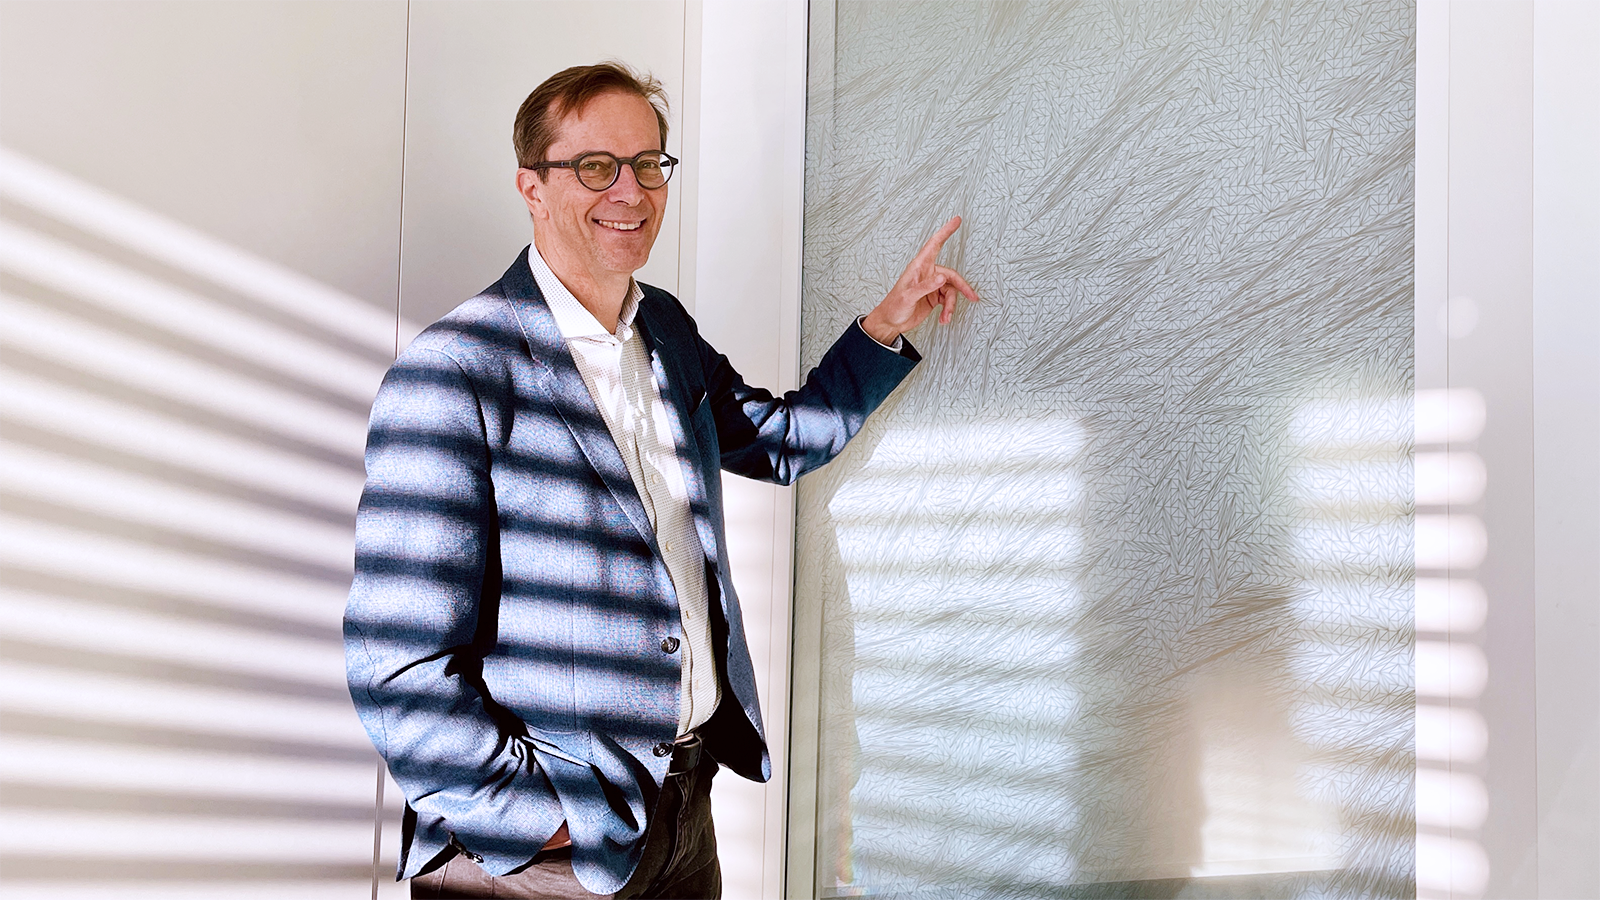 Professor Welzl stands in front of his window decorations and points to them.